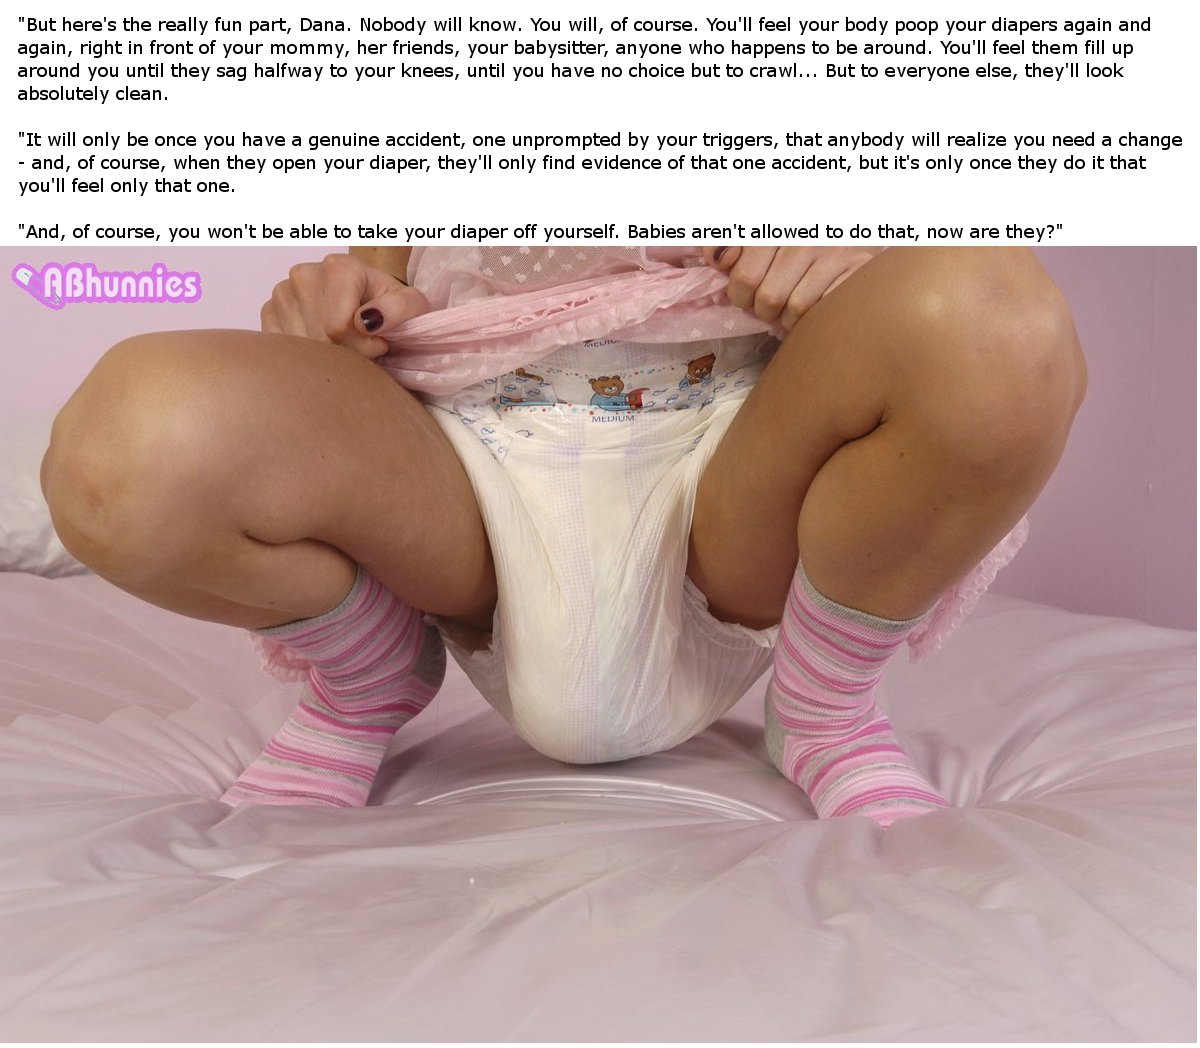 best of Diaper front friend humiliated